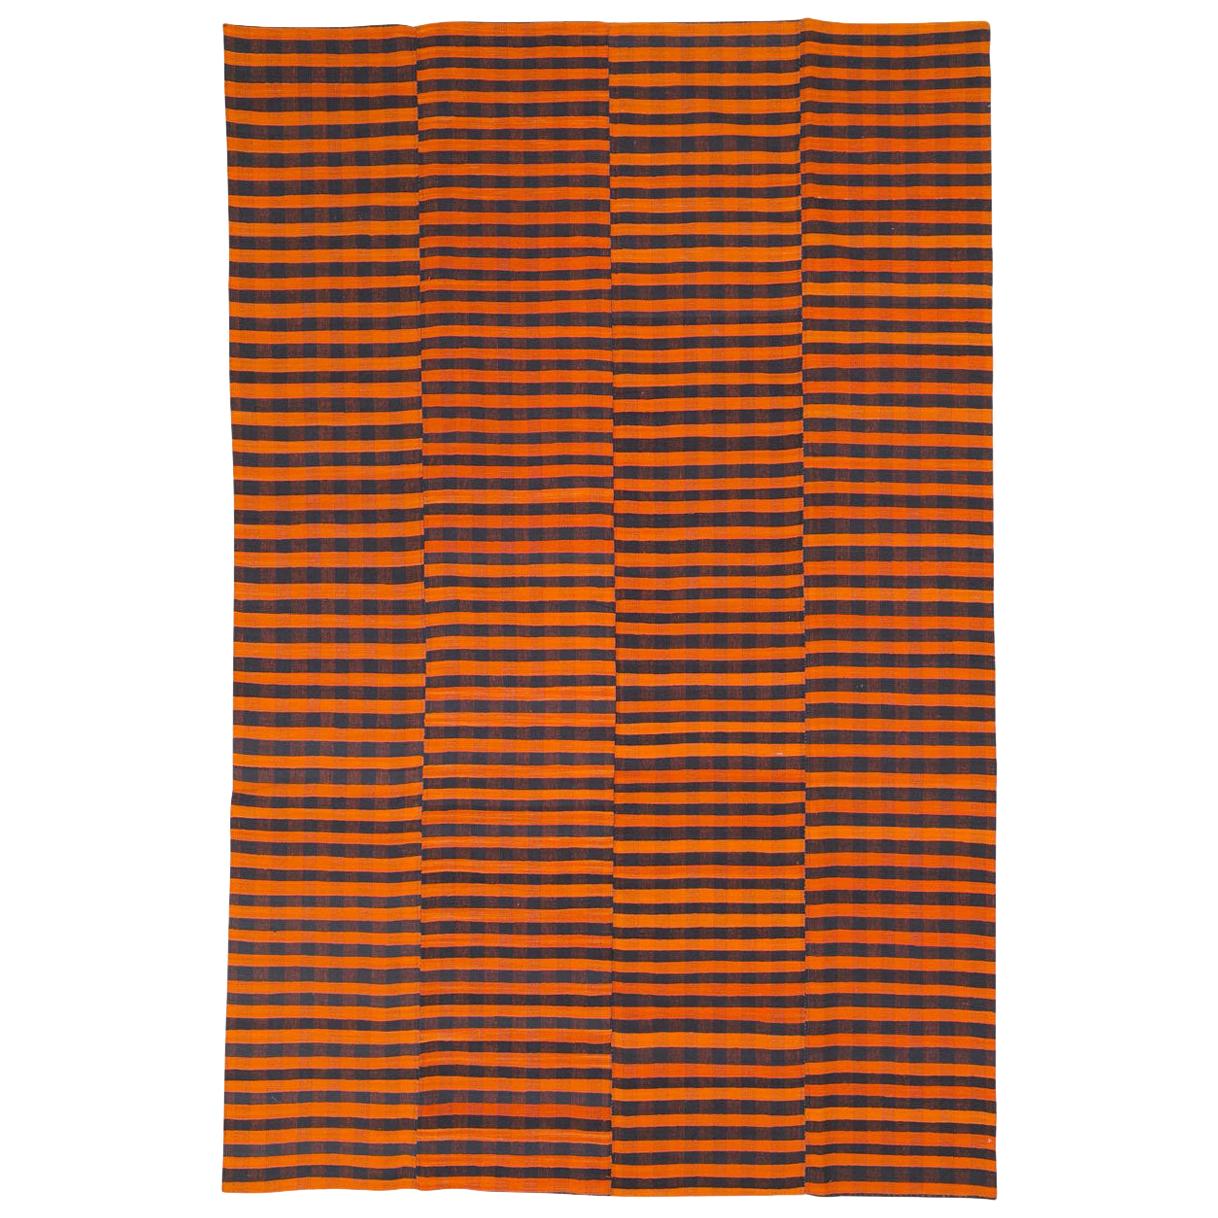 Mid-20th Century Orange and Black Turkish Flat-Weave Kilim Room Size Accent Rug For Sale